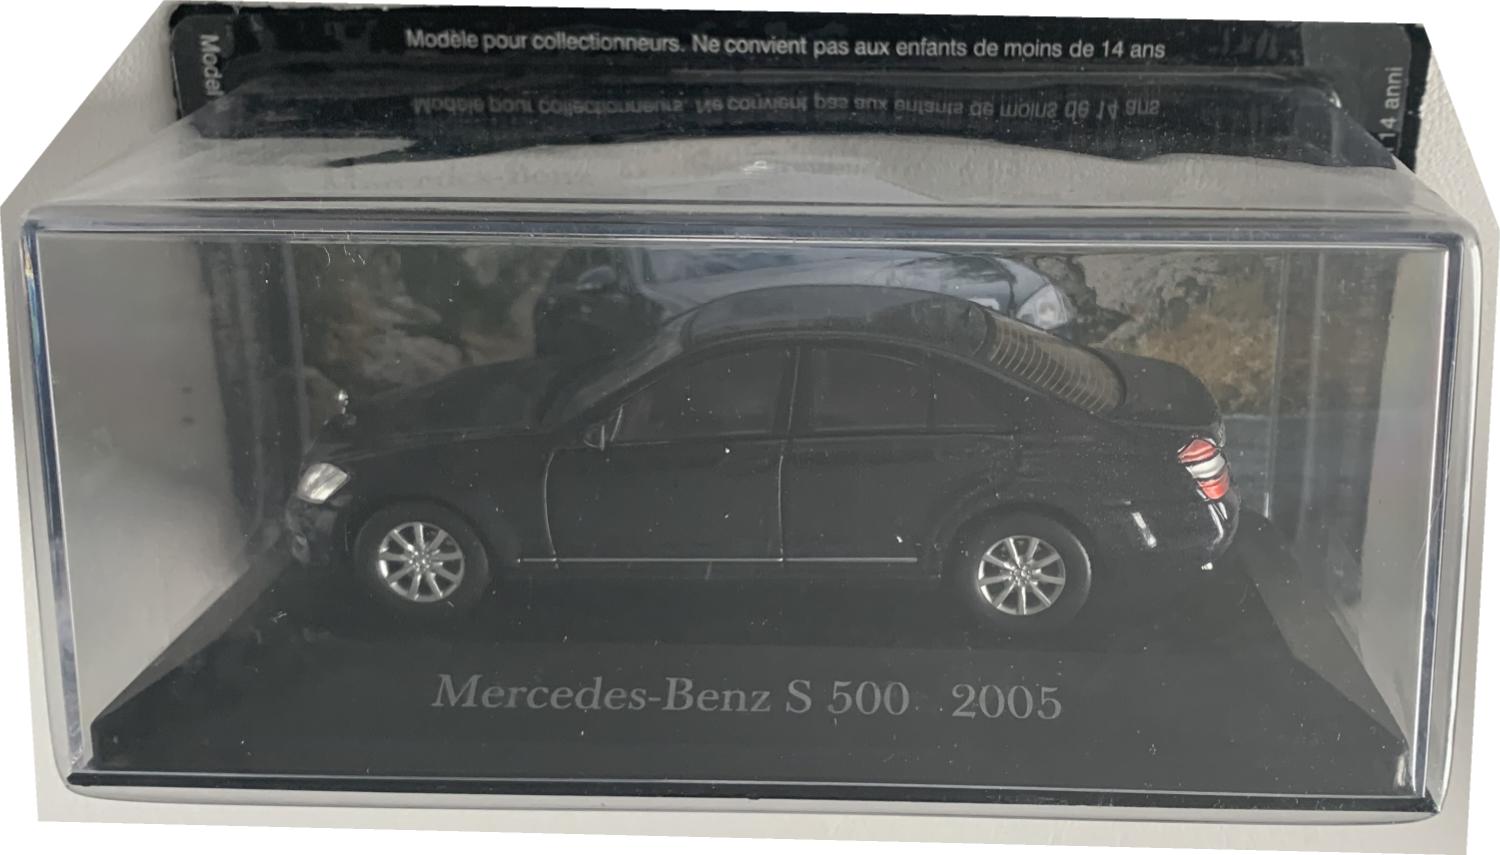 Mercedes Benz S 500 (W221) 2005 in dark blue 1:43 scale model Car.  The model is presented on a removable plinth with a removable  hard plastic cover